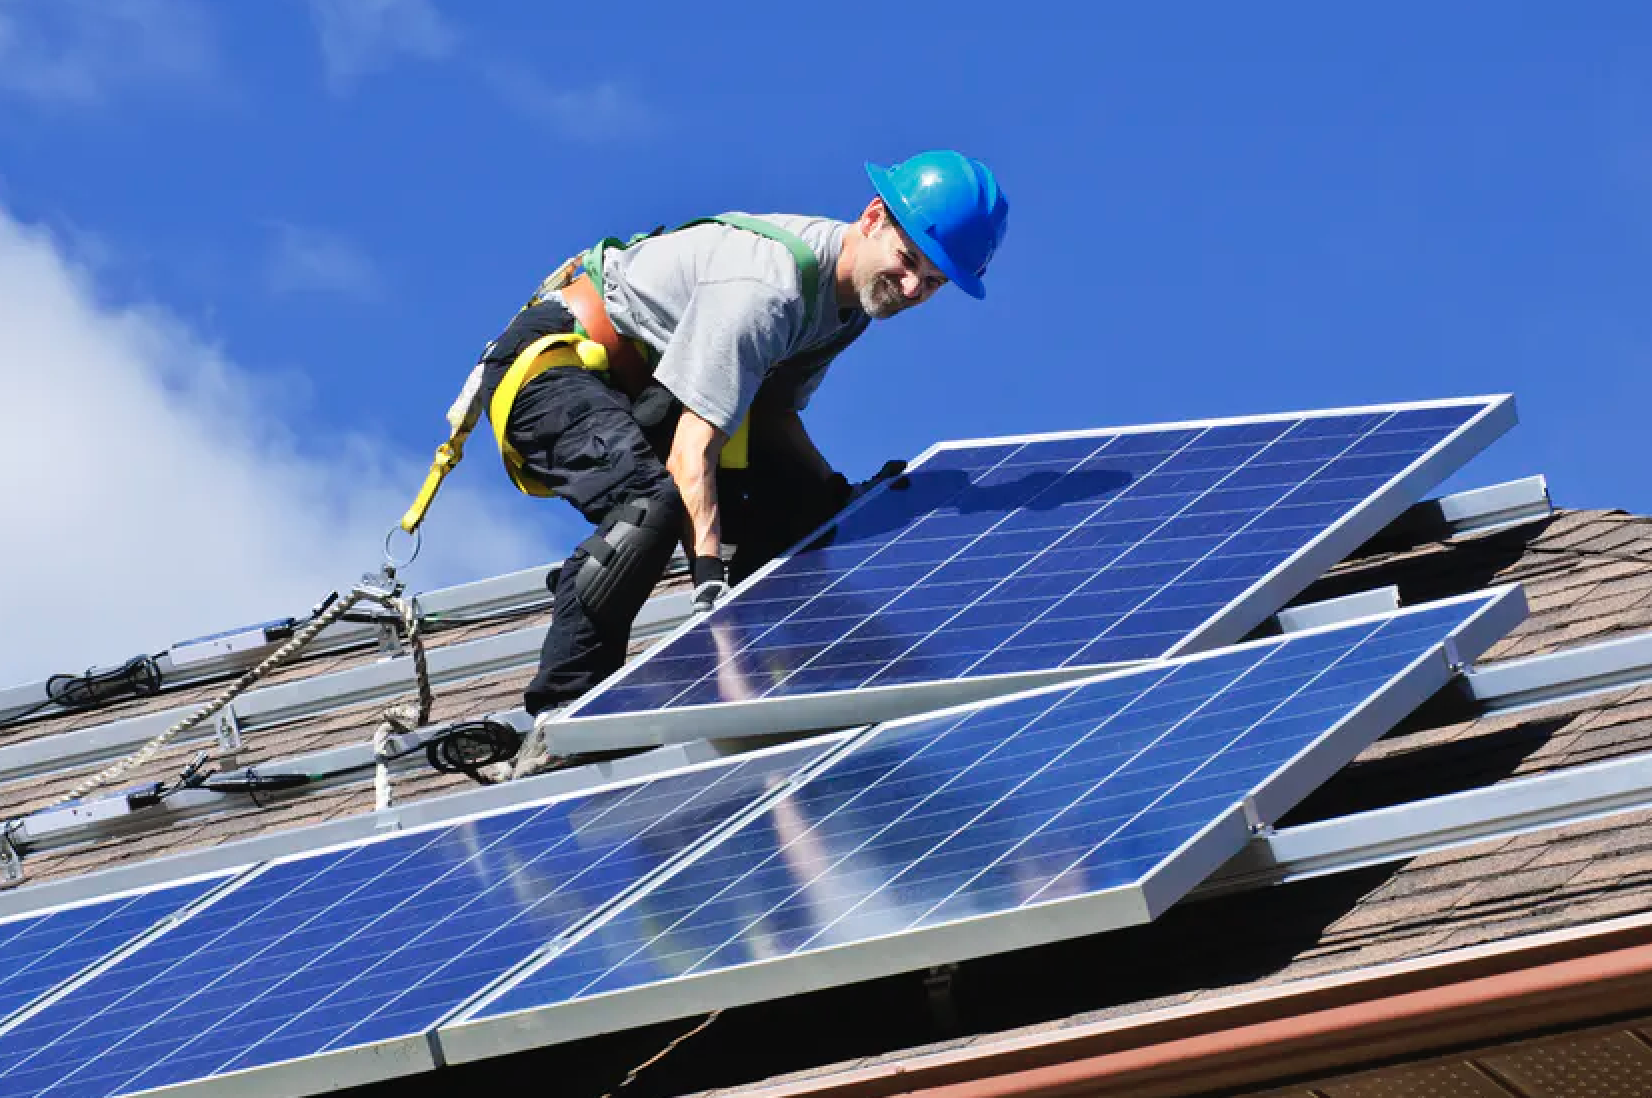 How much does the average residential solar panel installation cost in 2022?